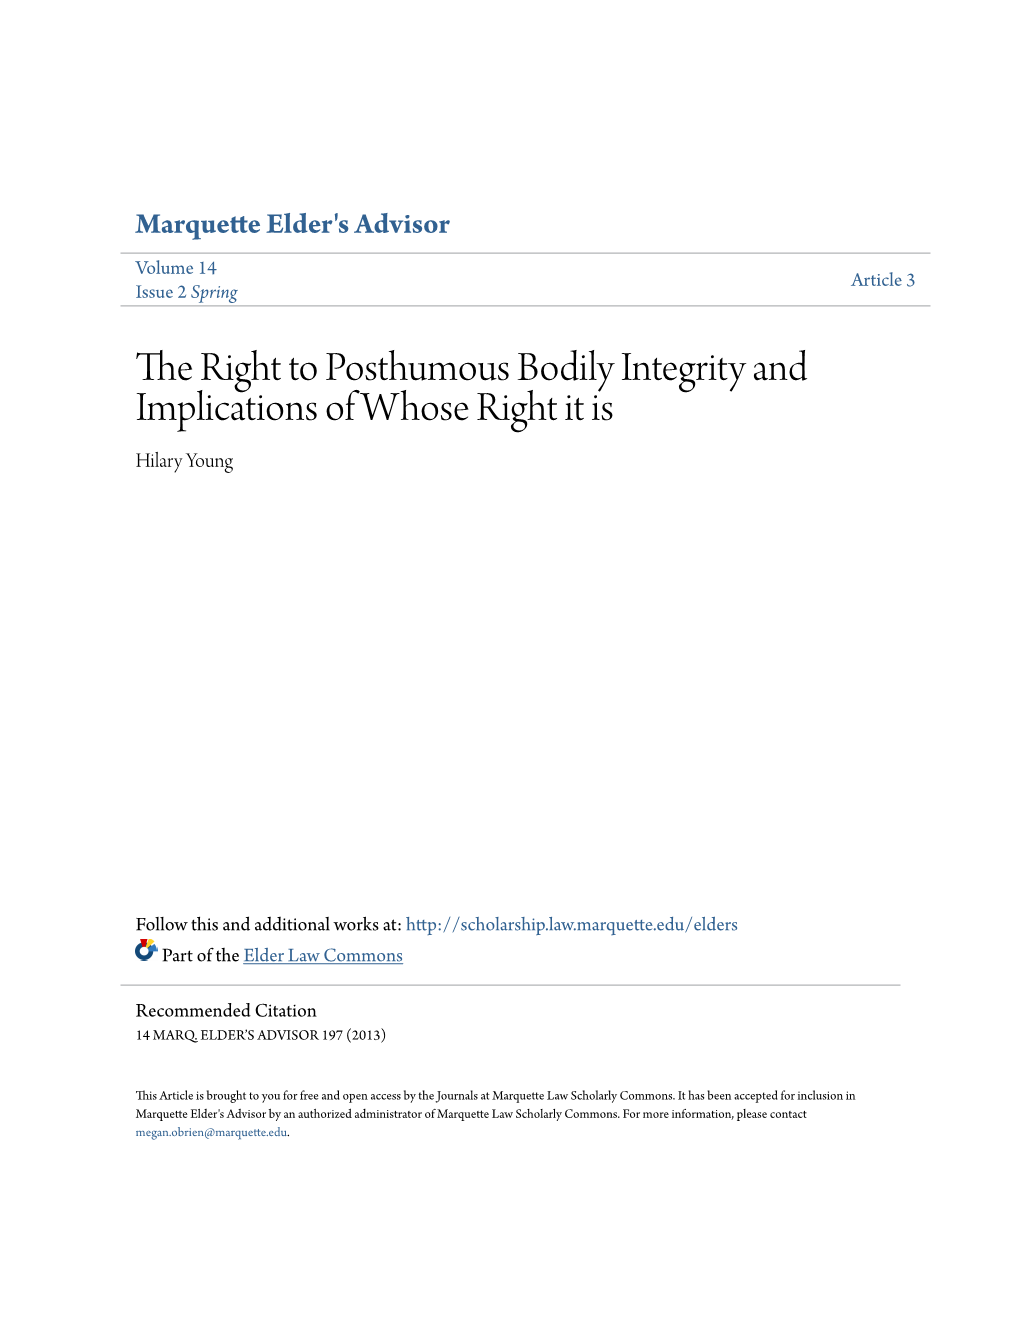 The Right to Posthumous Bodily Integrity and Implications of Whose Right It Is Hilary Young